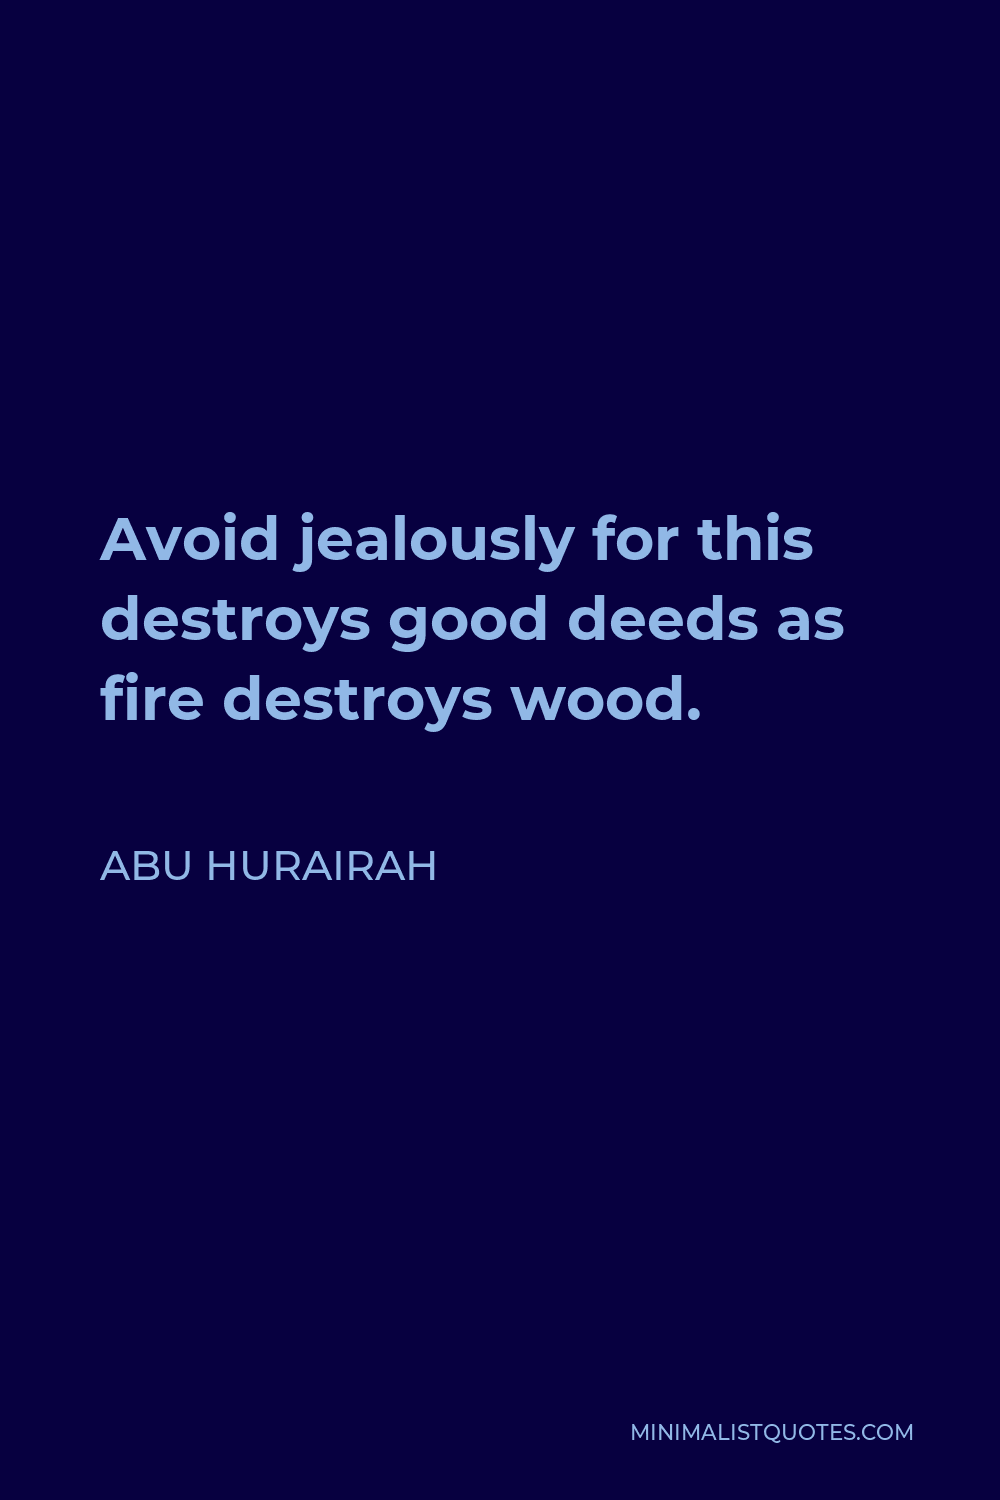 Abu Hurairah Quote - Avoid jealously for this destroys good deeds as fire destroys wood.